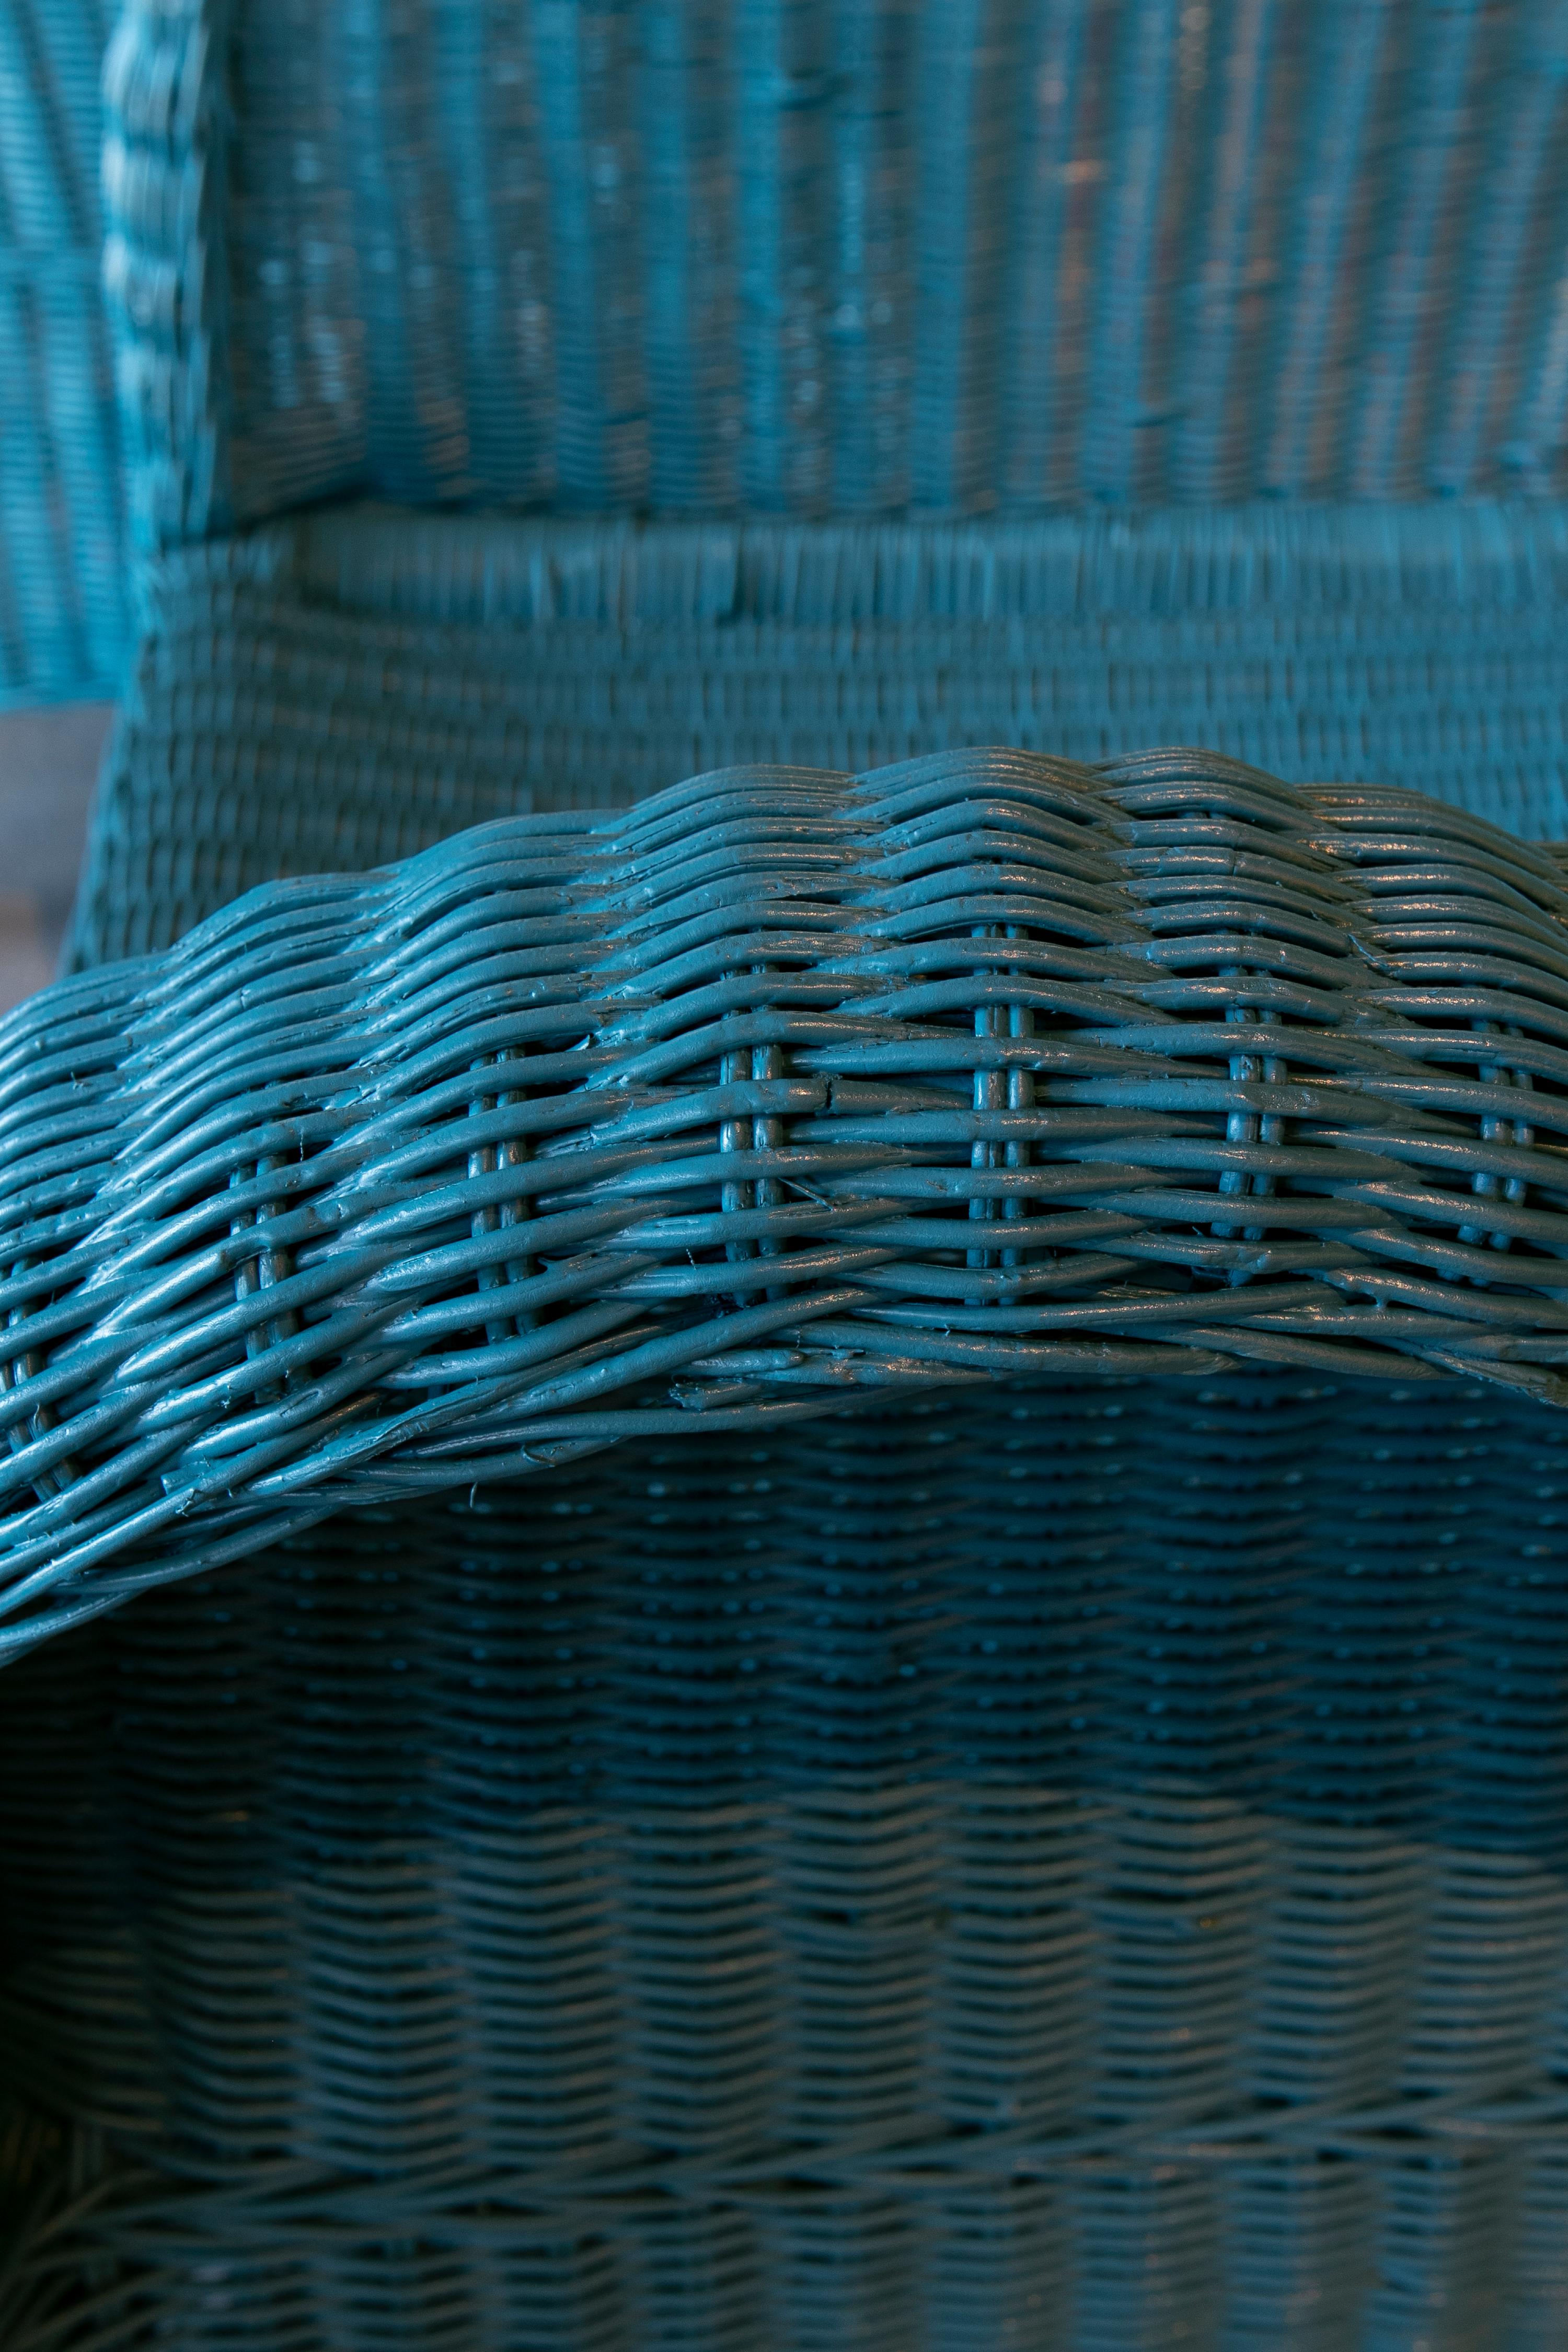 1970s Spanish Pair of Wicker Armchairs Painted in Blue 10